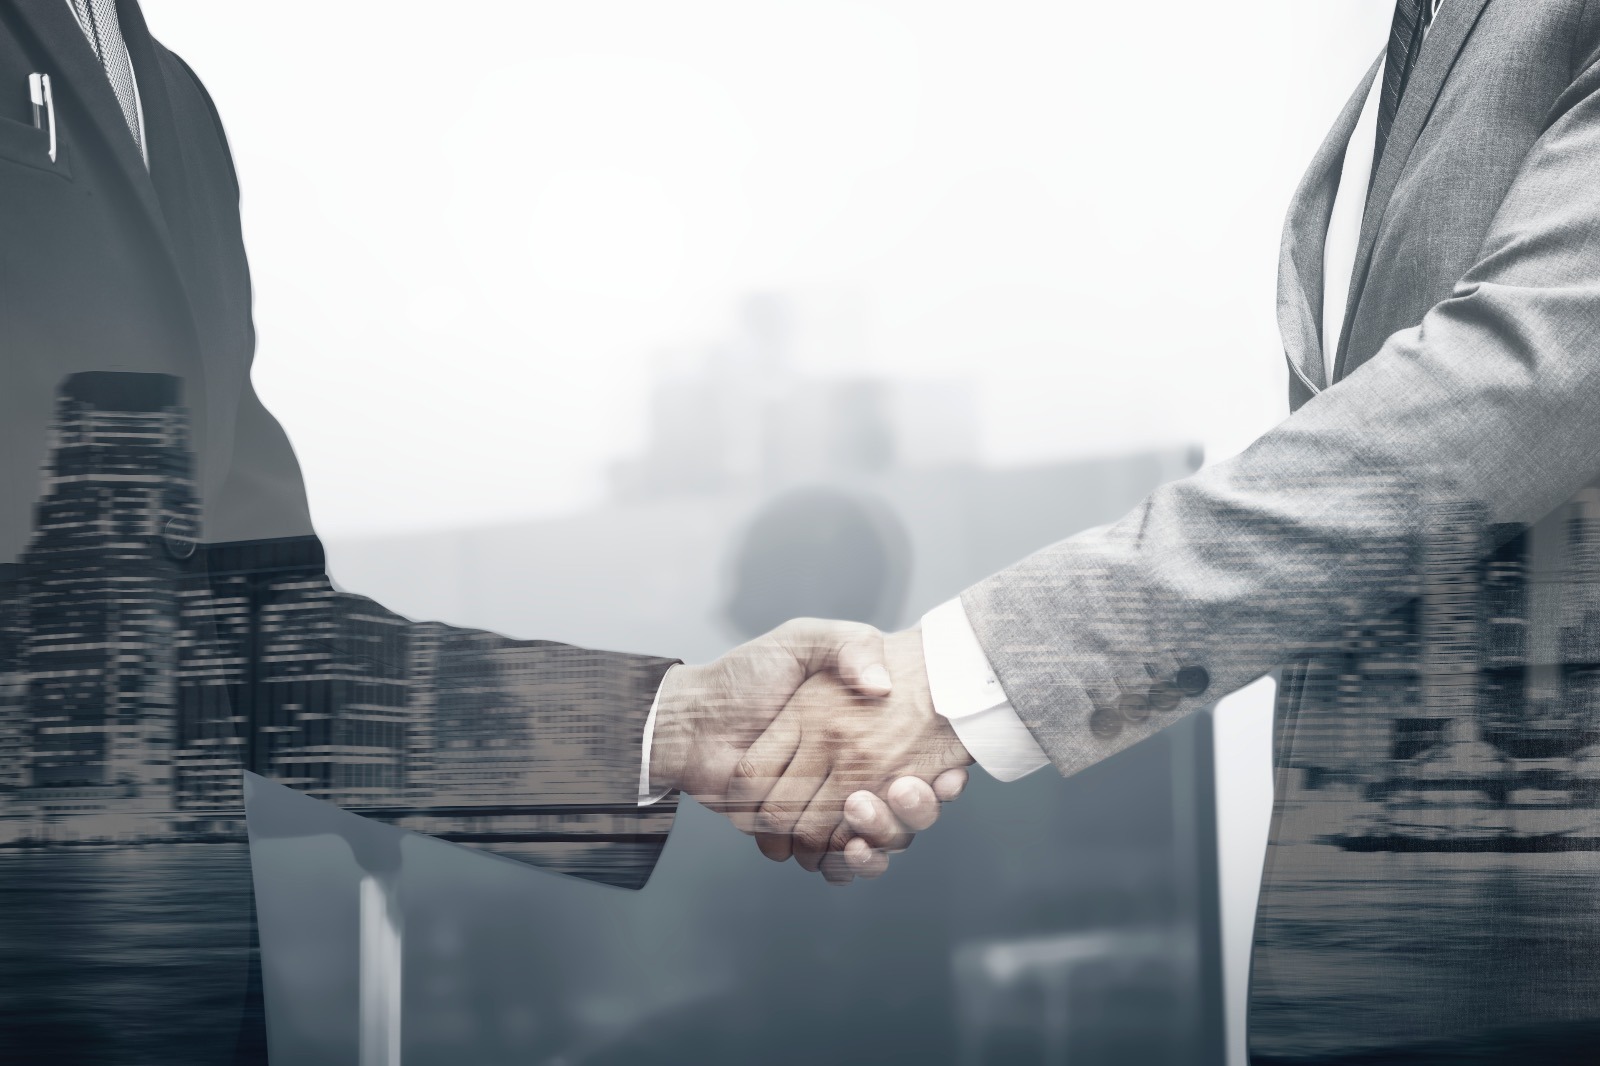 Closing a deal for great services with a handshake